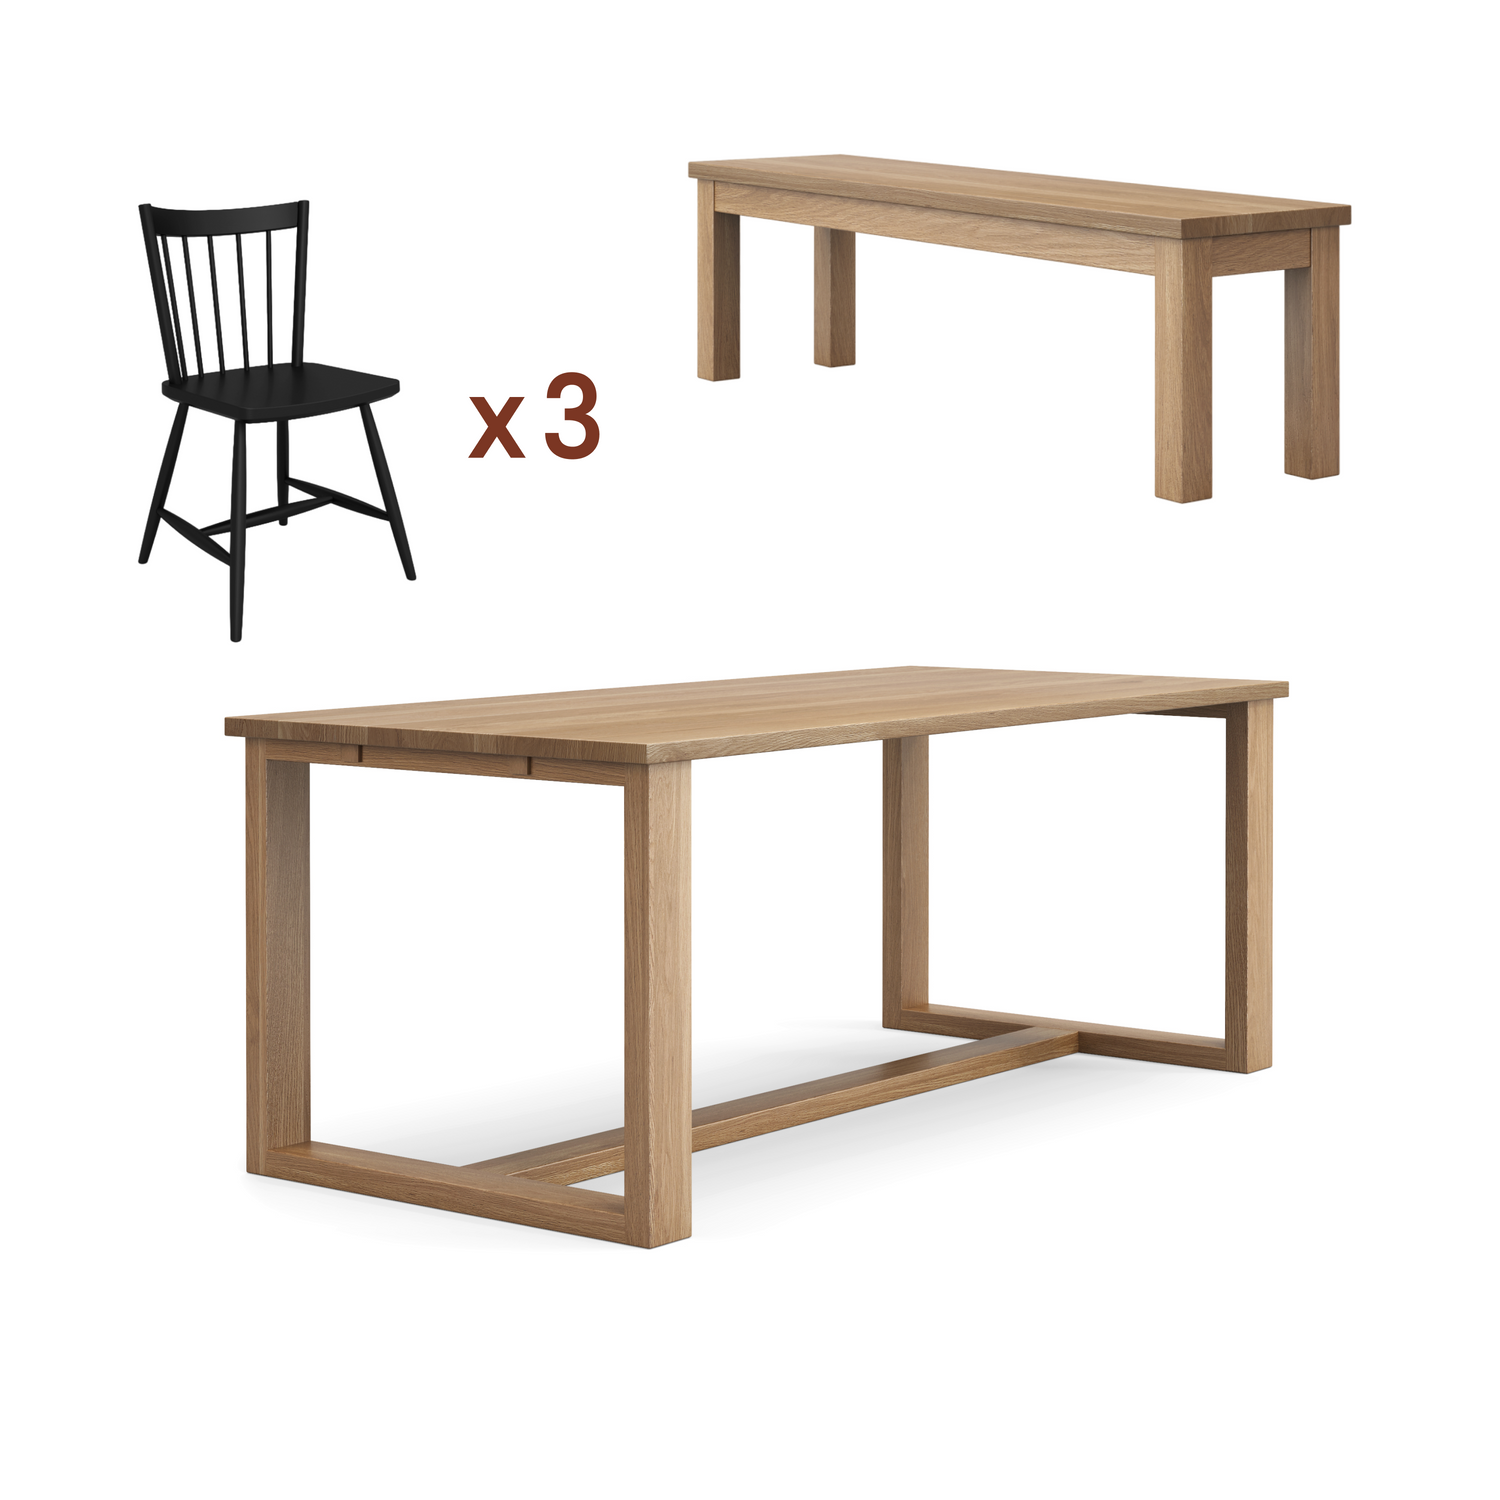 Arwin table + bench + chairs bundle